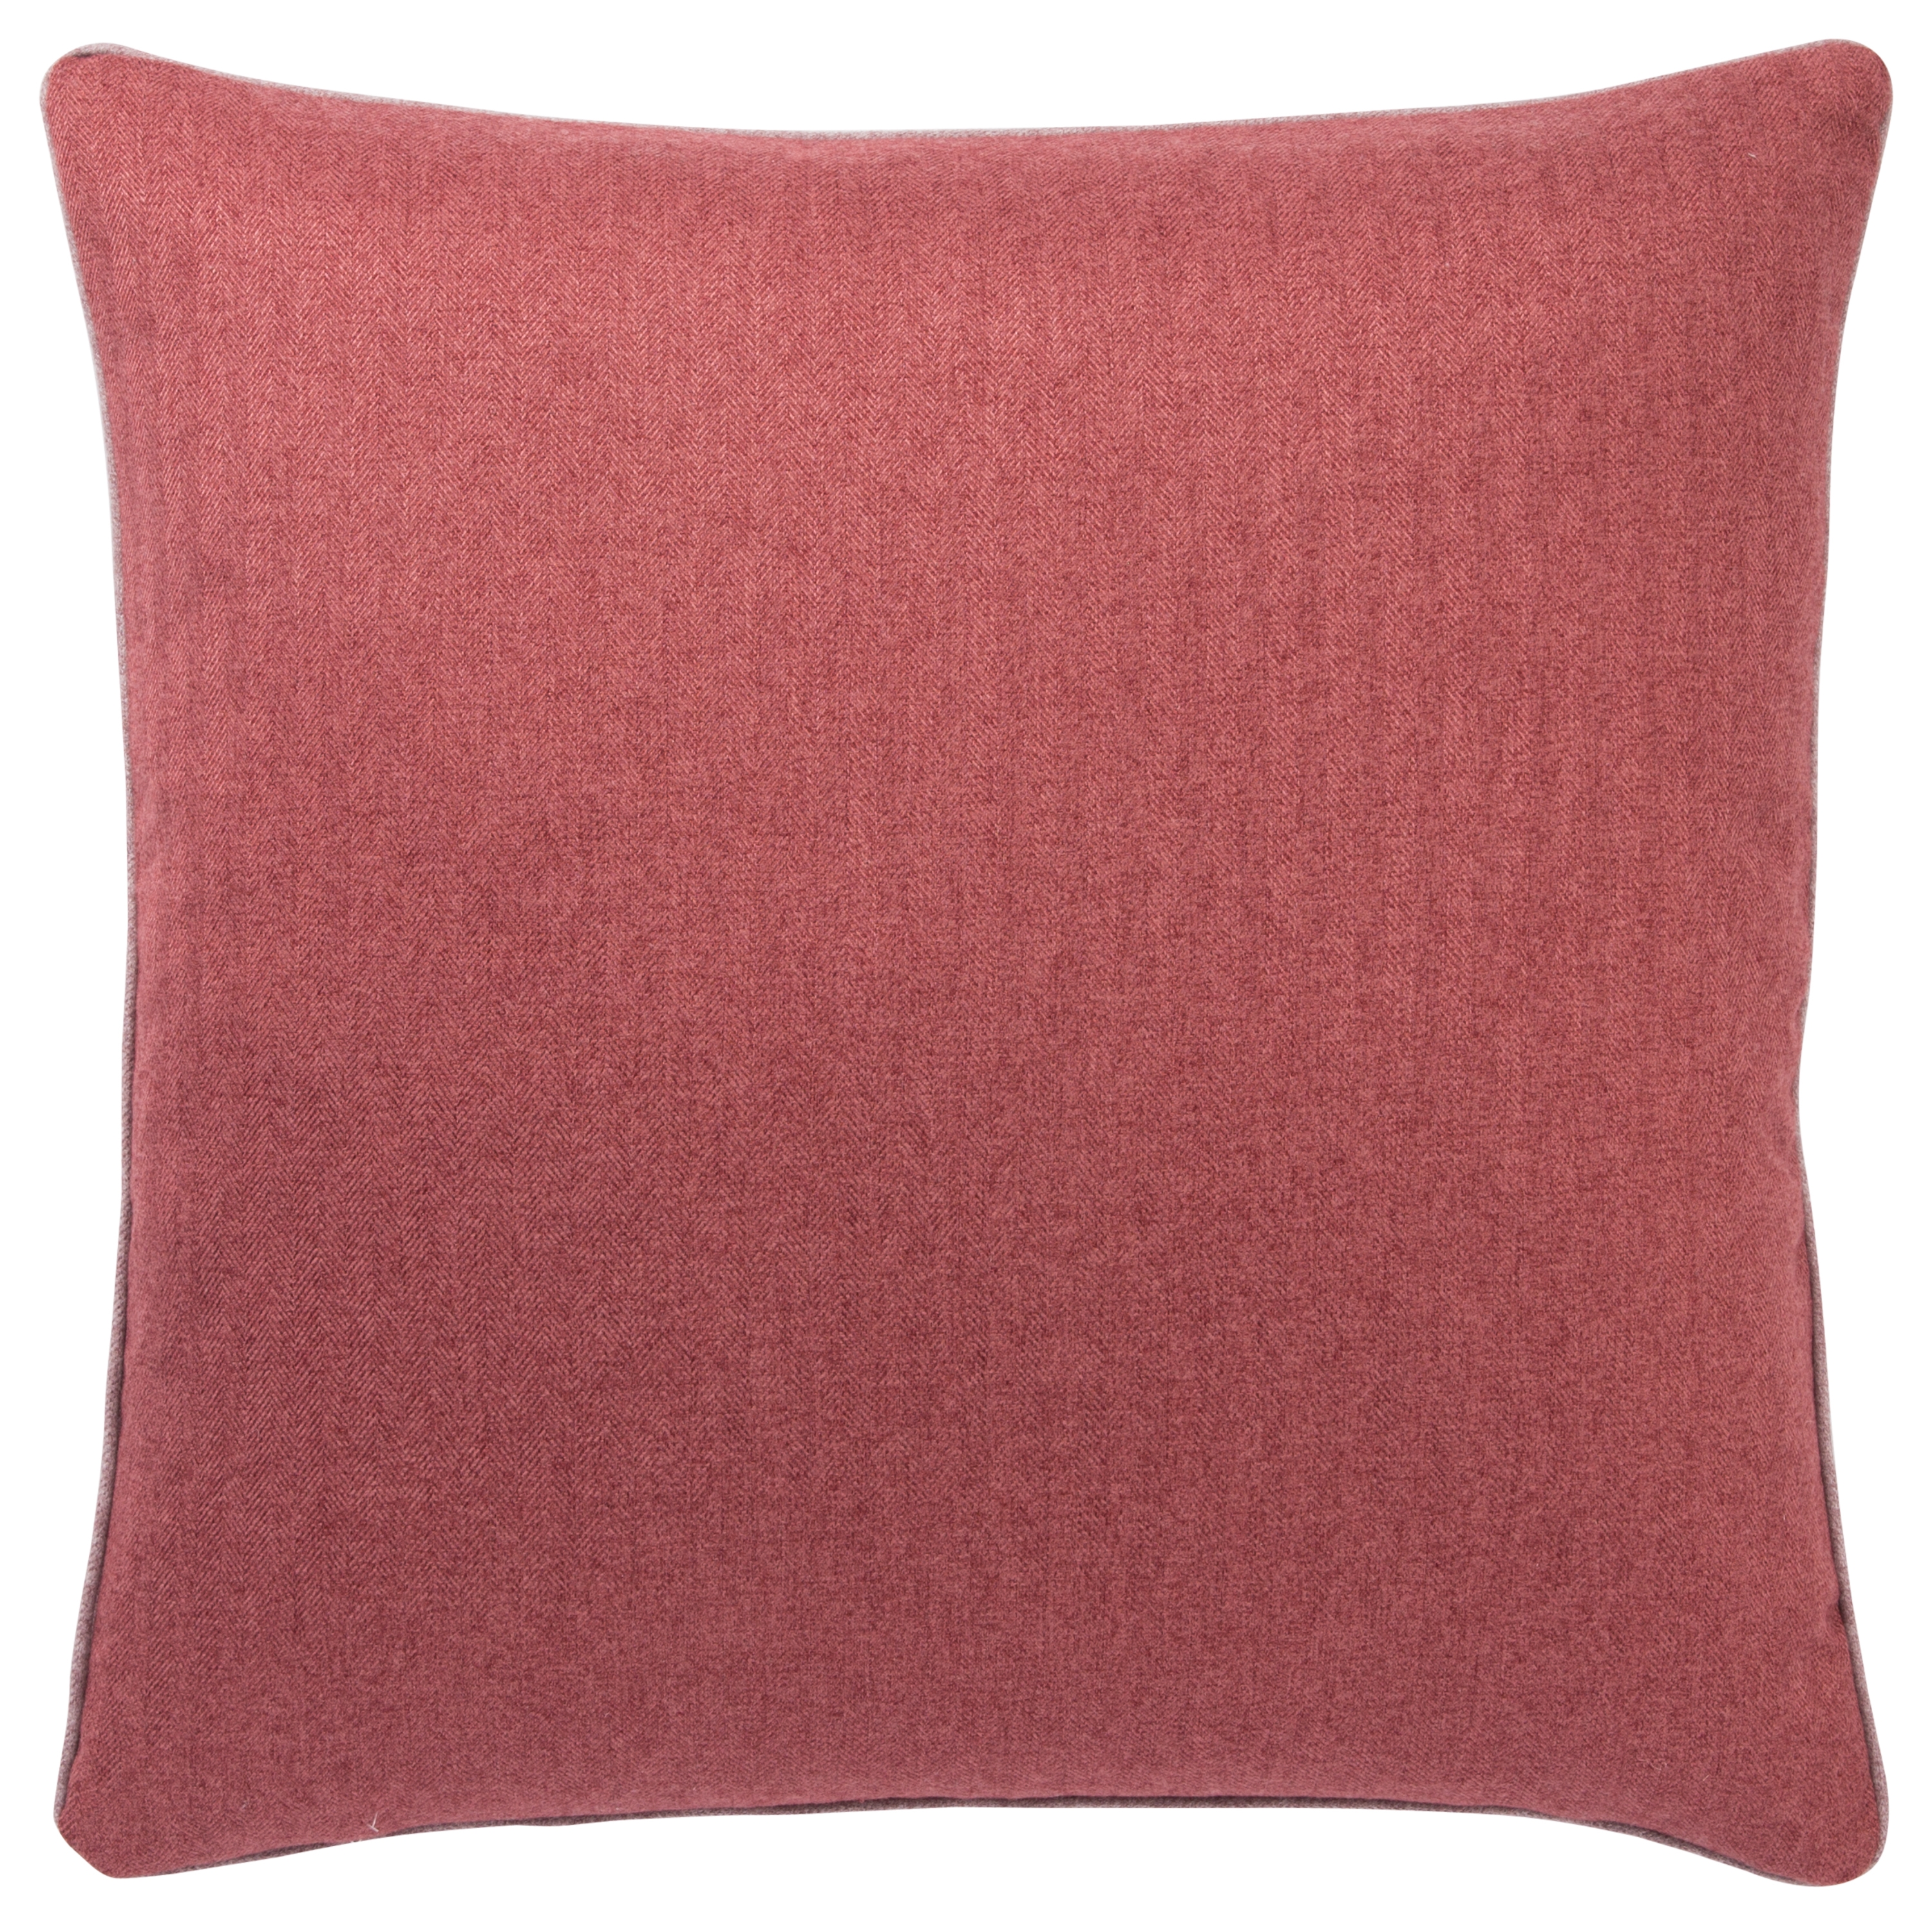 Design (US) Red 22"X22" Pillow - Image 1